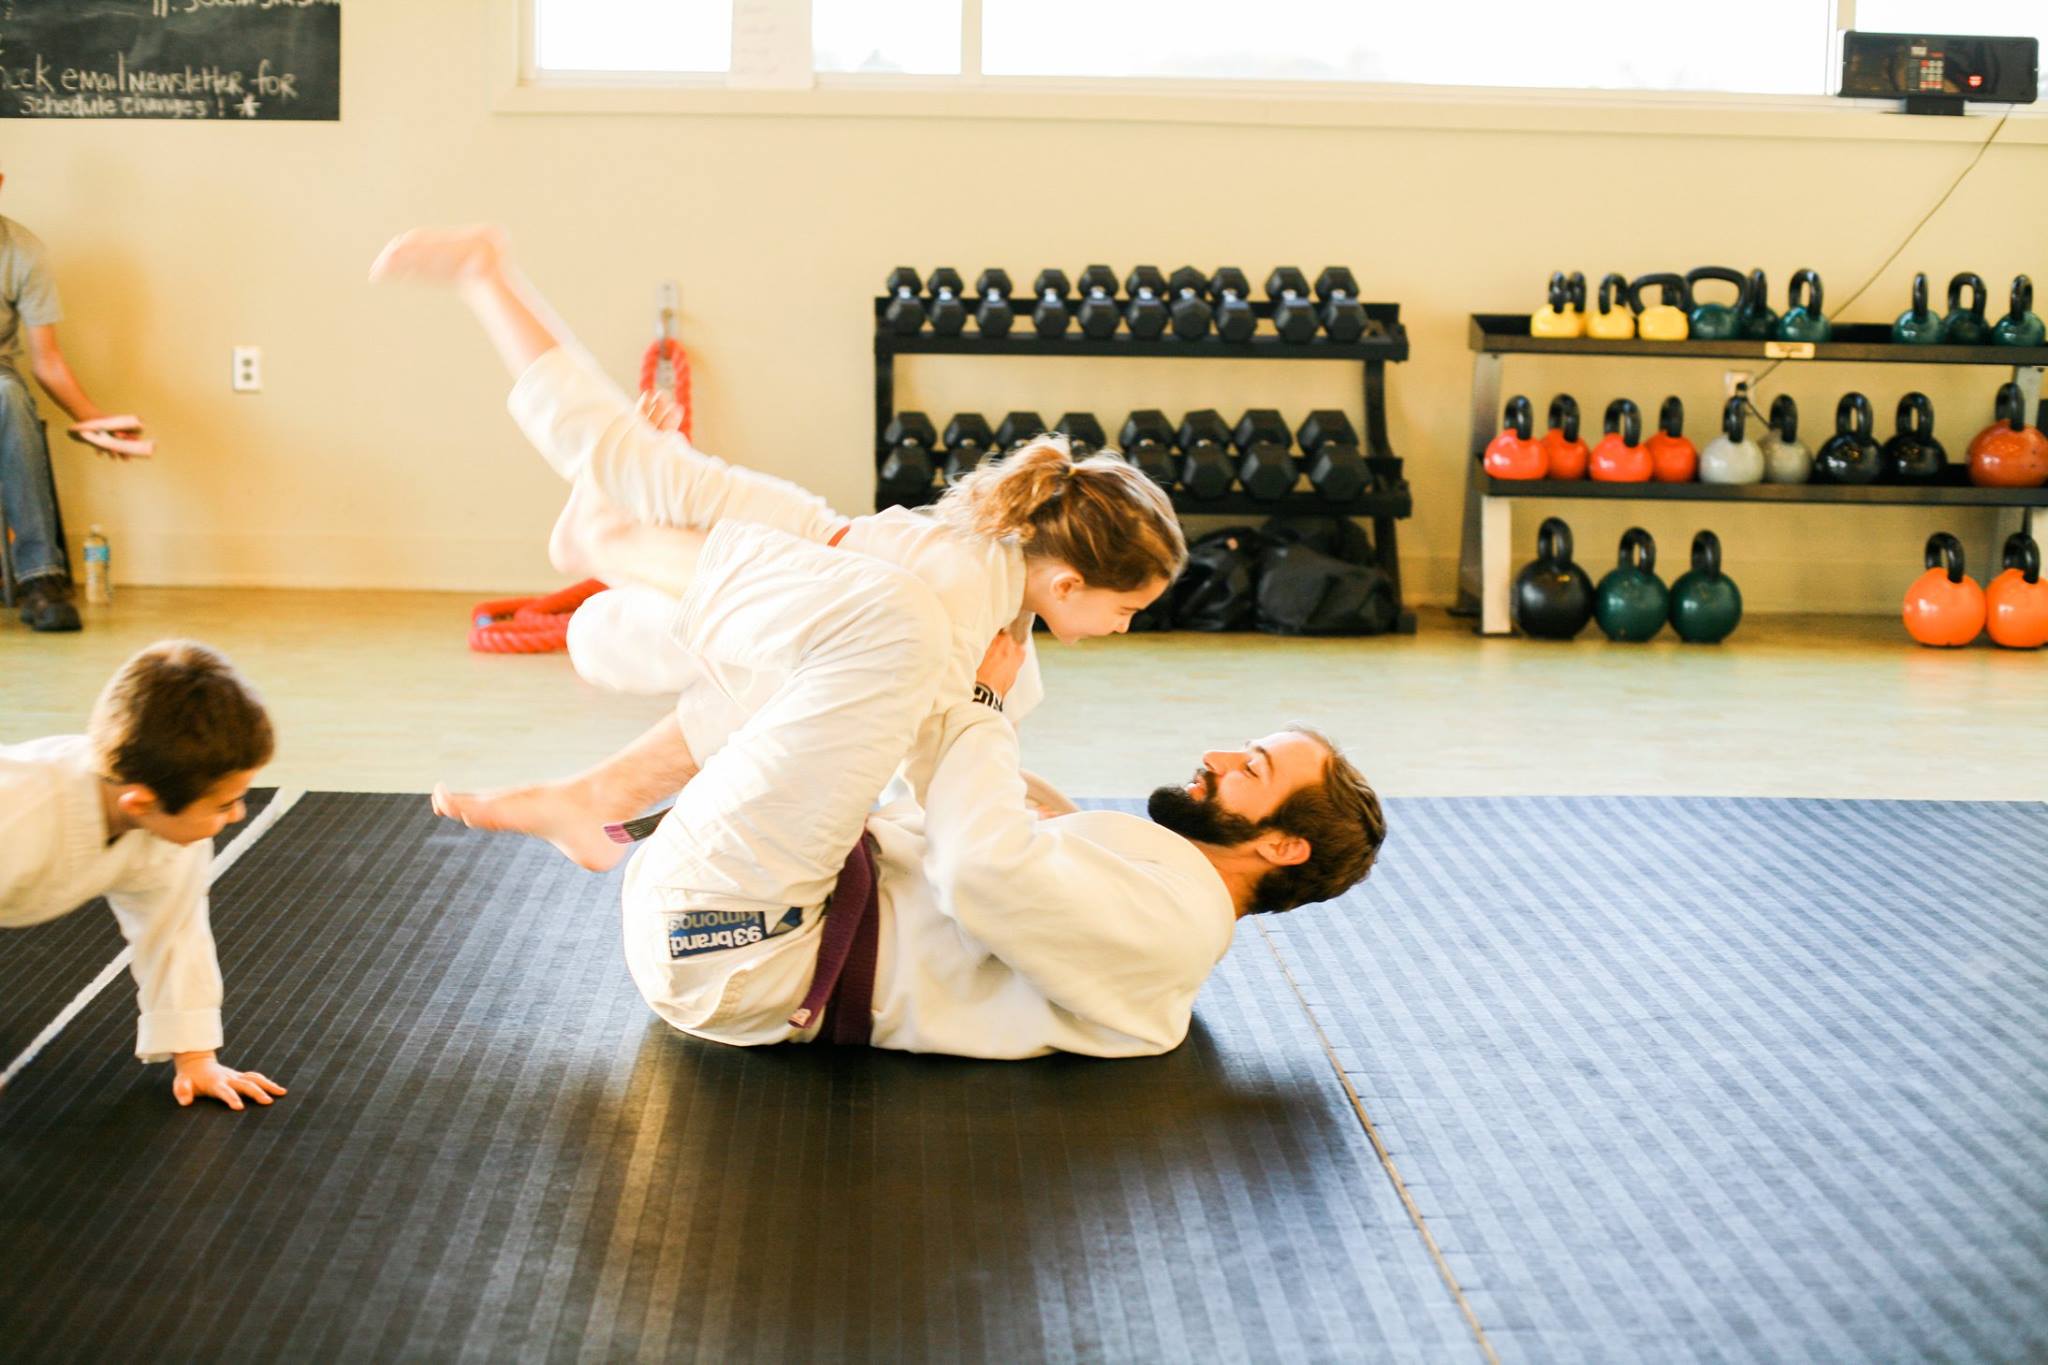 best jiu jitsu moves to teach kid for competition